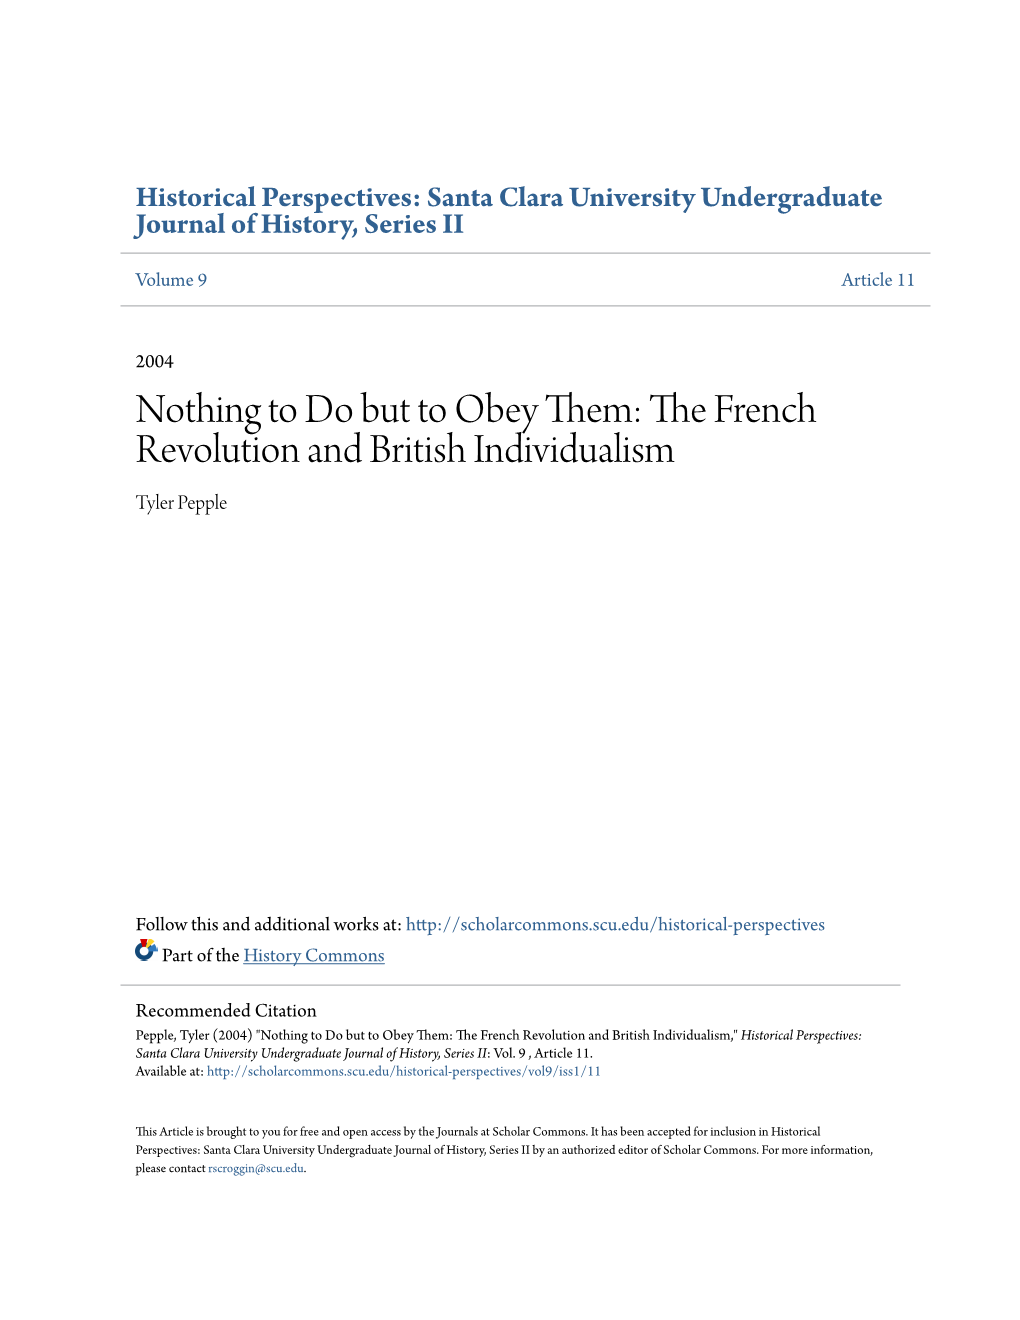 The French Revolution and British Individualism 55 56 Historical Perspectives March 2004